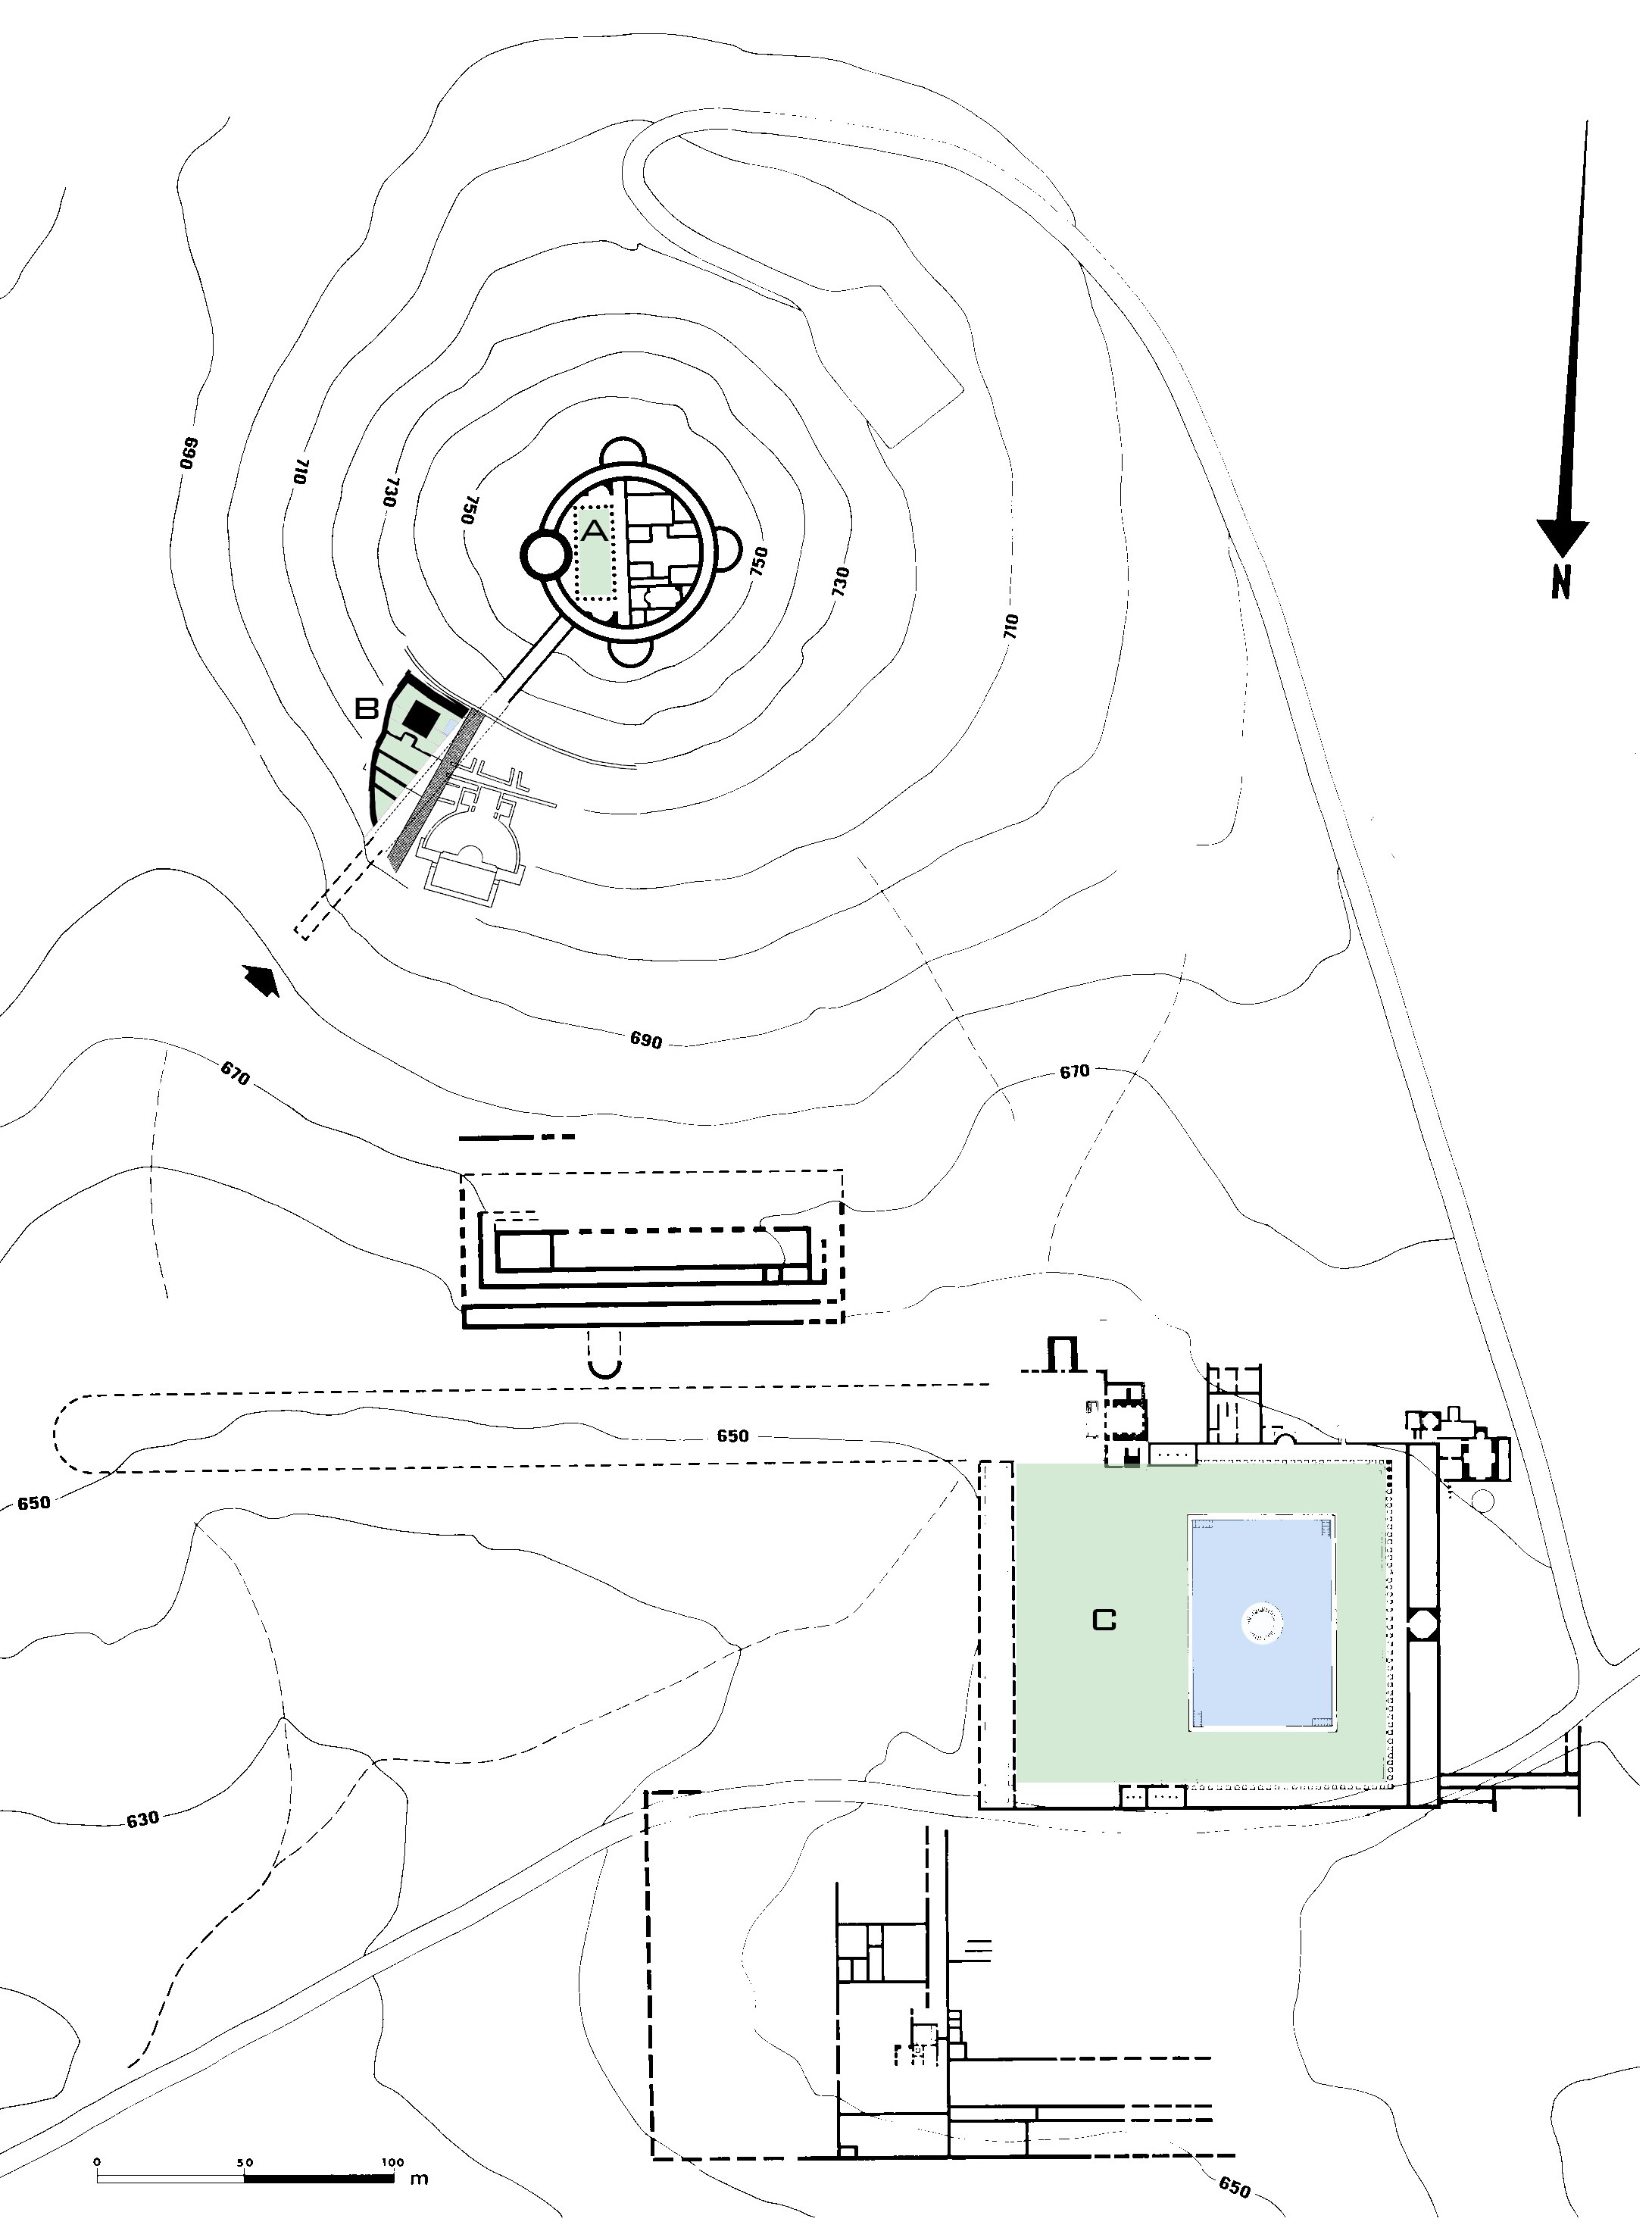 Fig. 1:Plan of the complex at Herodium showing the Fortress Palace with its small peristyle garden (A), the Tomb Garden (B) and the Lower Palace with its central pool and cultivated grounds (C) (Yaniv Korman after Netzer).